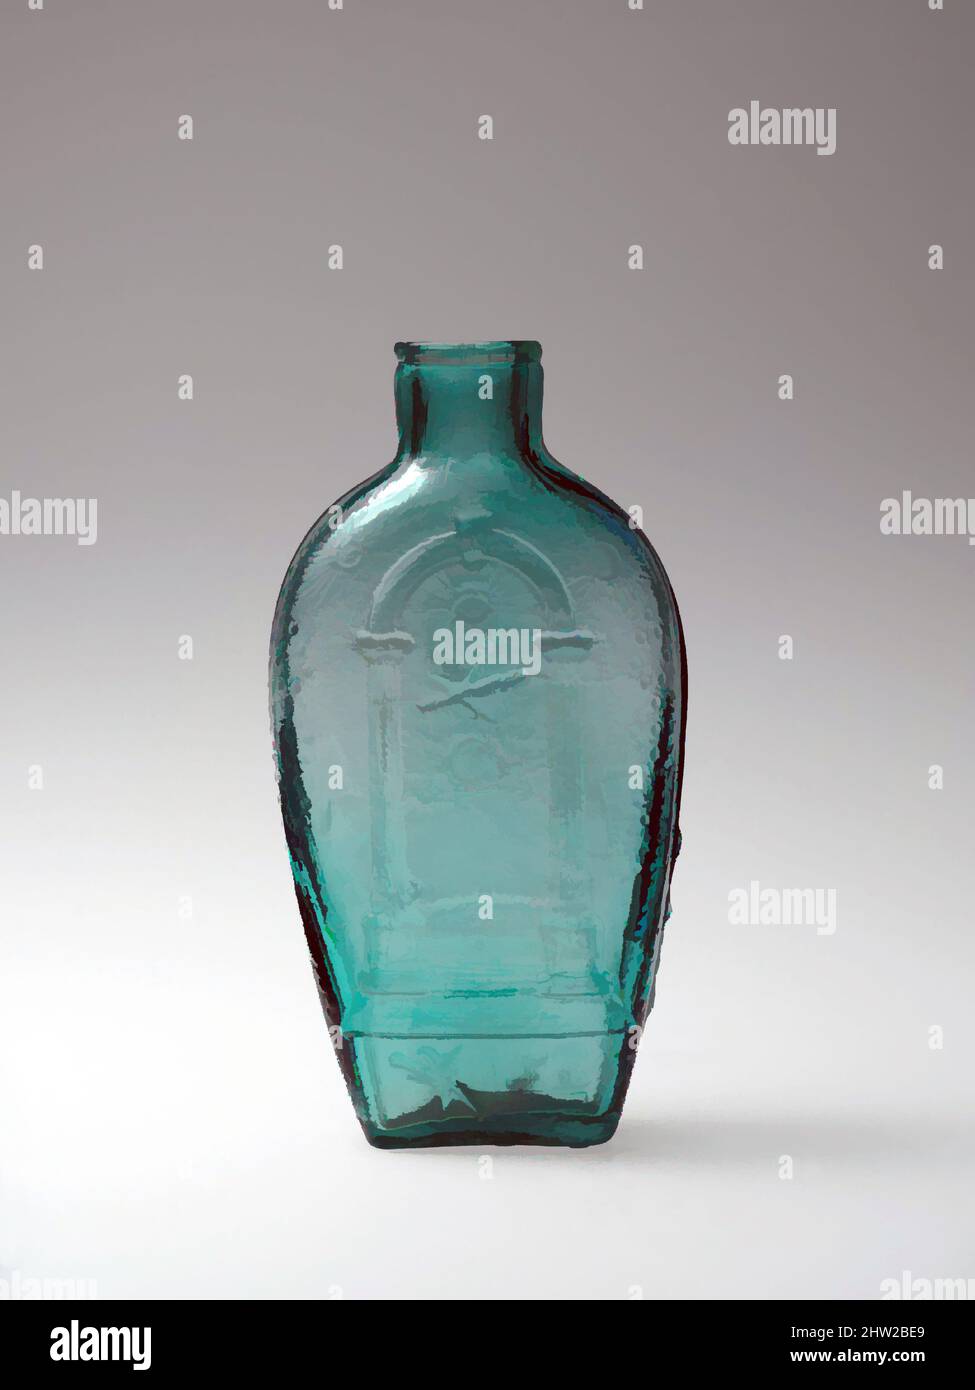 Art inspired by Figured flask, 1820–30, Made in United States, American, Blown-molded glass, H. 6 5/8 in. (16.8 cm), Glass, Classic works modernized by Artotop with a splash of modernity. Shapes, color and value, eye-catching visual impact on art. Emotions through freedom of artworks in a contemporary way. A timeless message pursuing a wildly creative new direction. Artists turning to the digital medium and creating the Artotop NFT Stock Photo